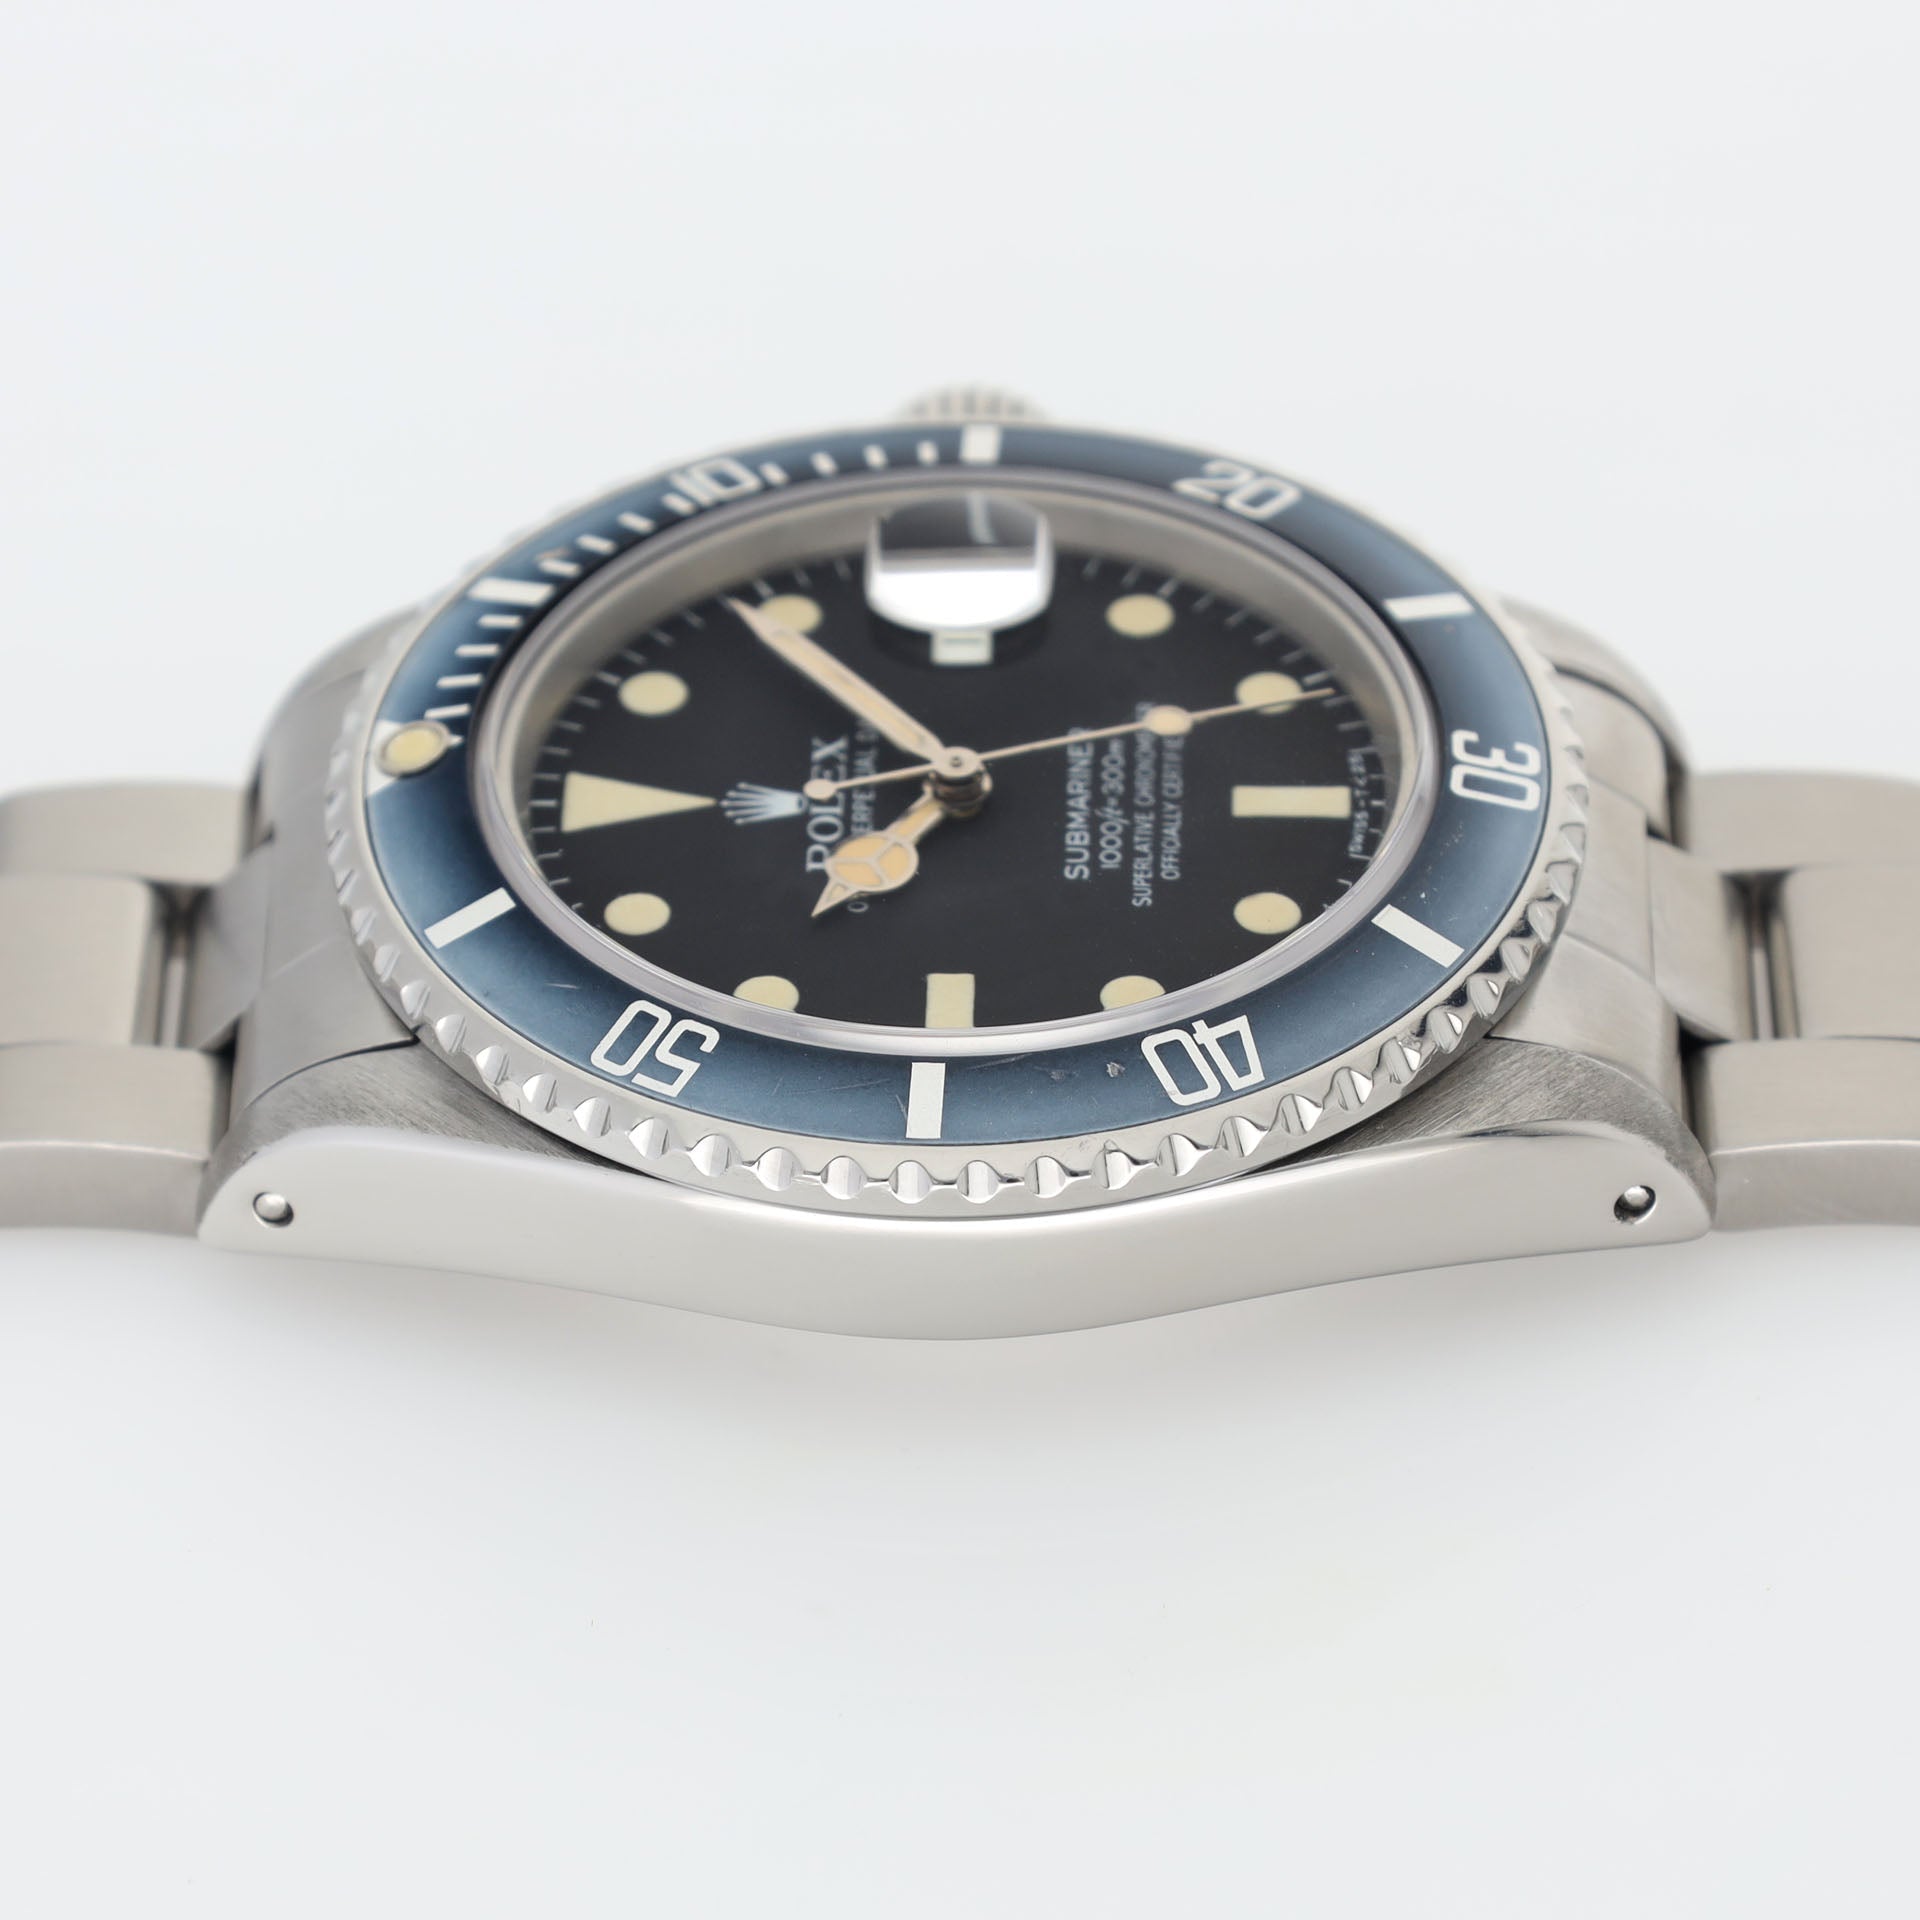 Rolex Submariner Date 16800 Matte Dial Faded Bezel Box and Papers